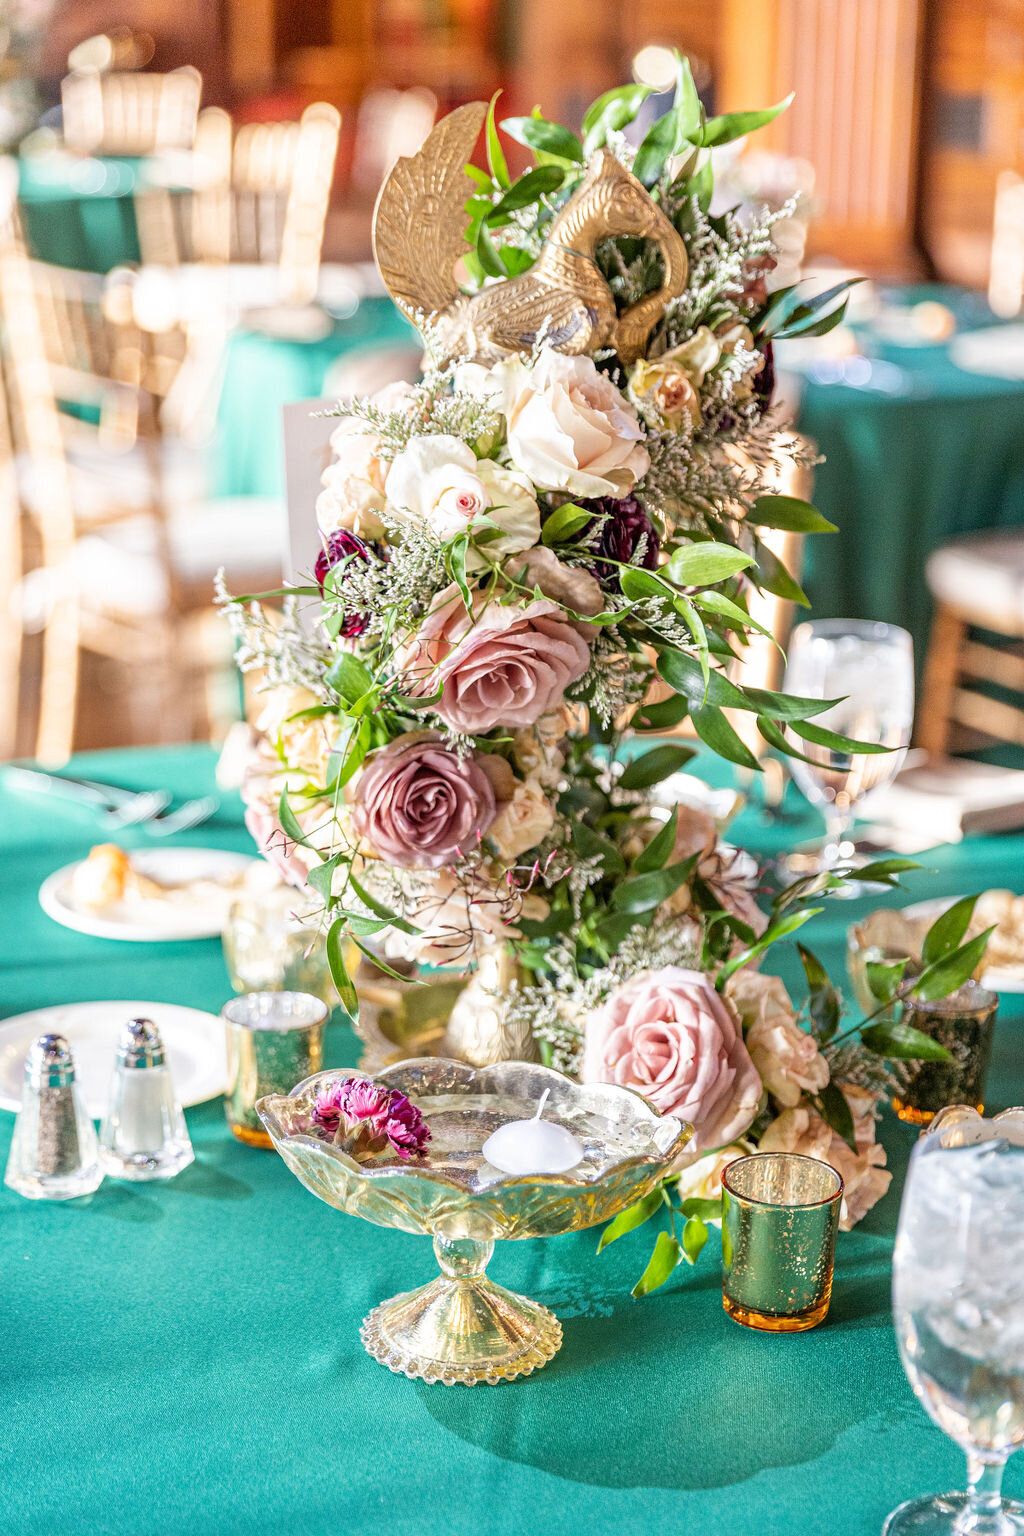 Elevated floral centerpieces Satin & Stems.